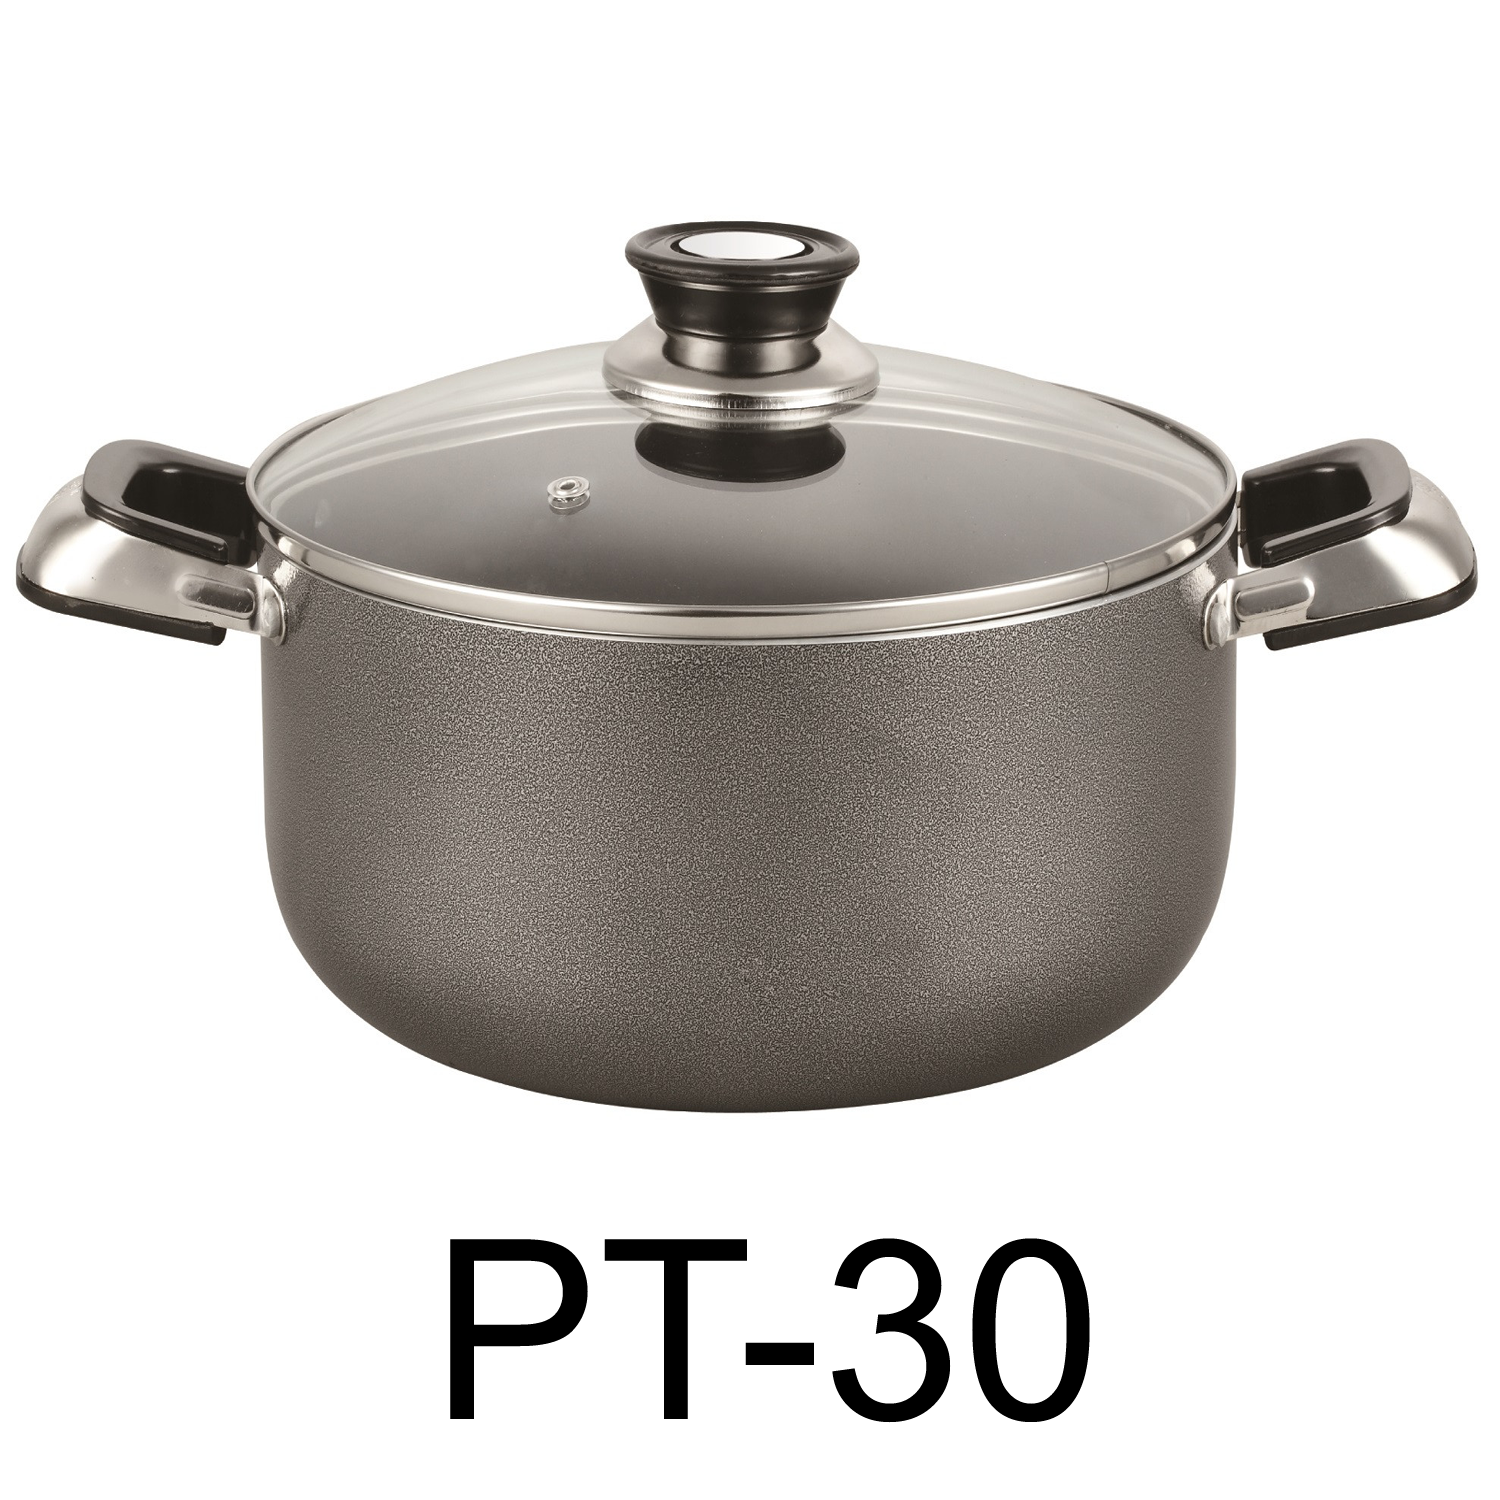 Stainless Steel 6.5-Qt. Multipurpose Pan with Glass Lid, New in package